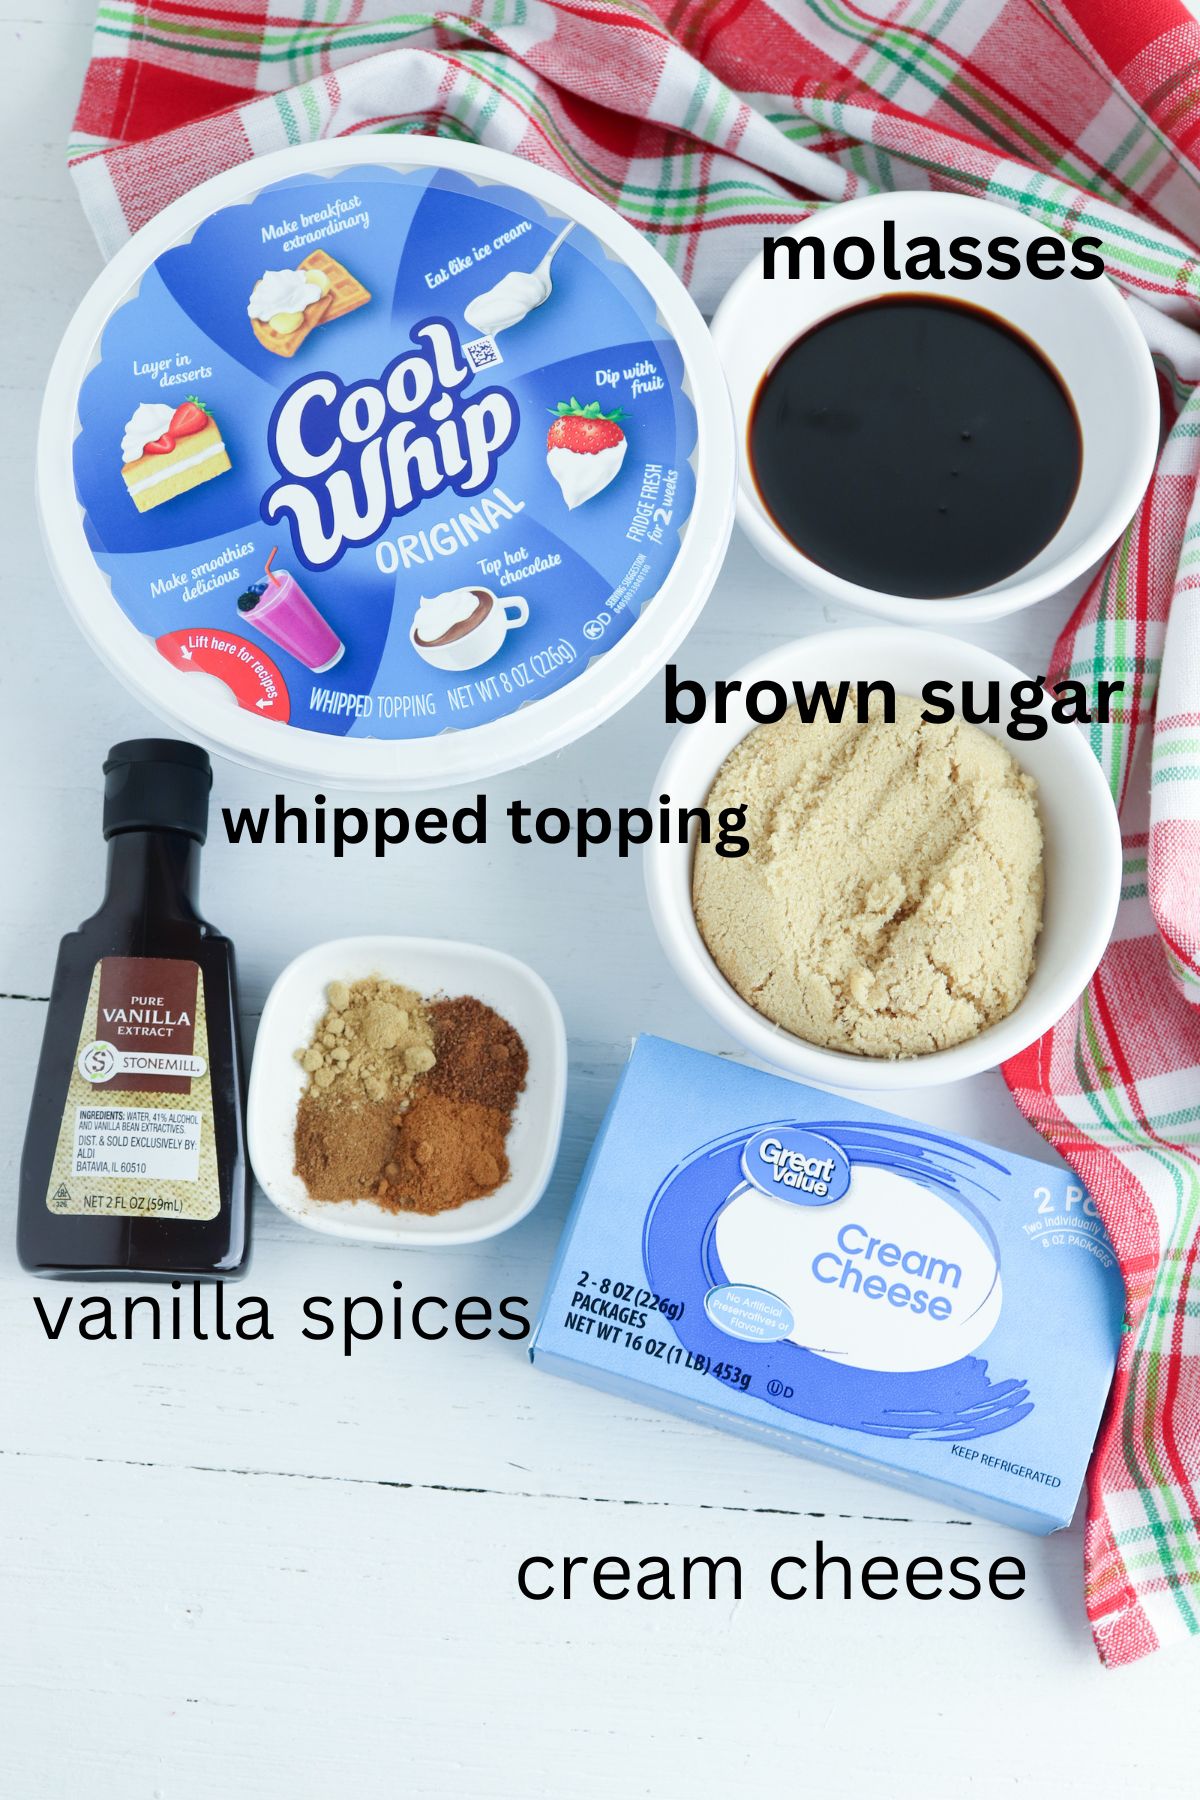 whipped topping, molasses, brown sugar, cream cheese, vanilla extract, and spices on a white background